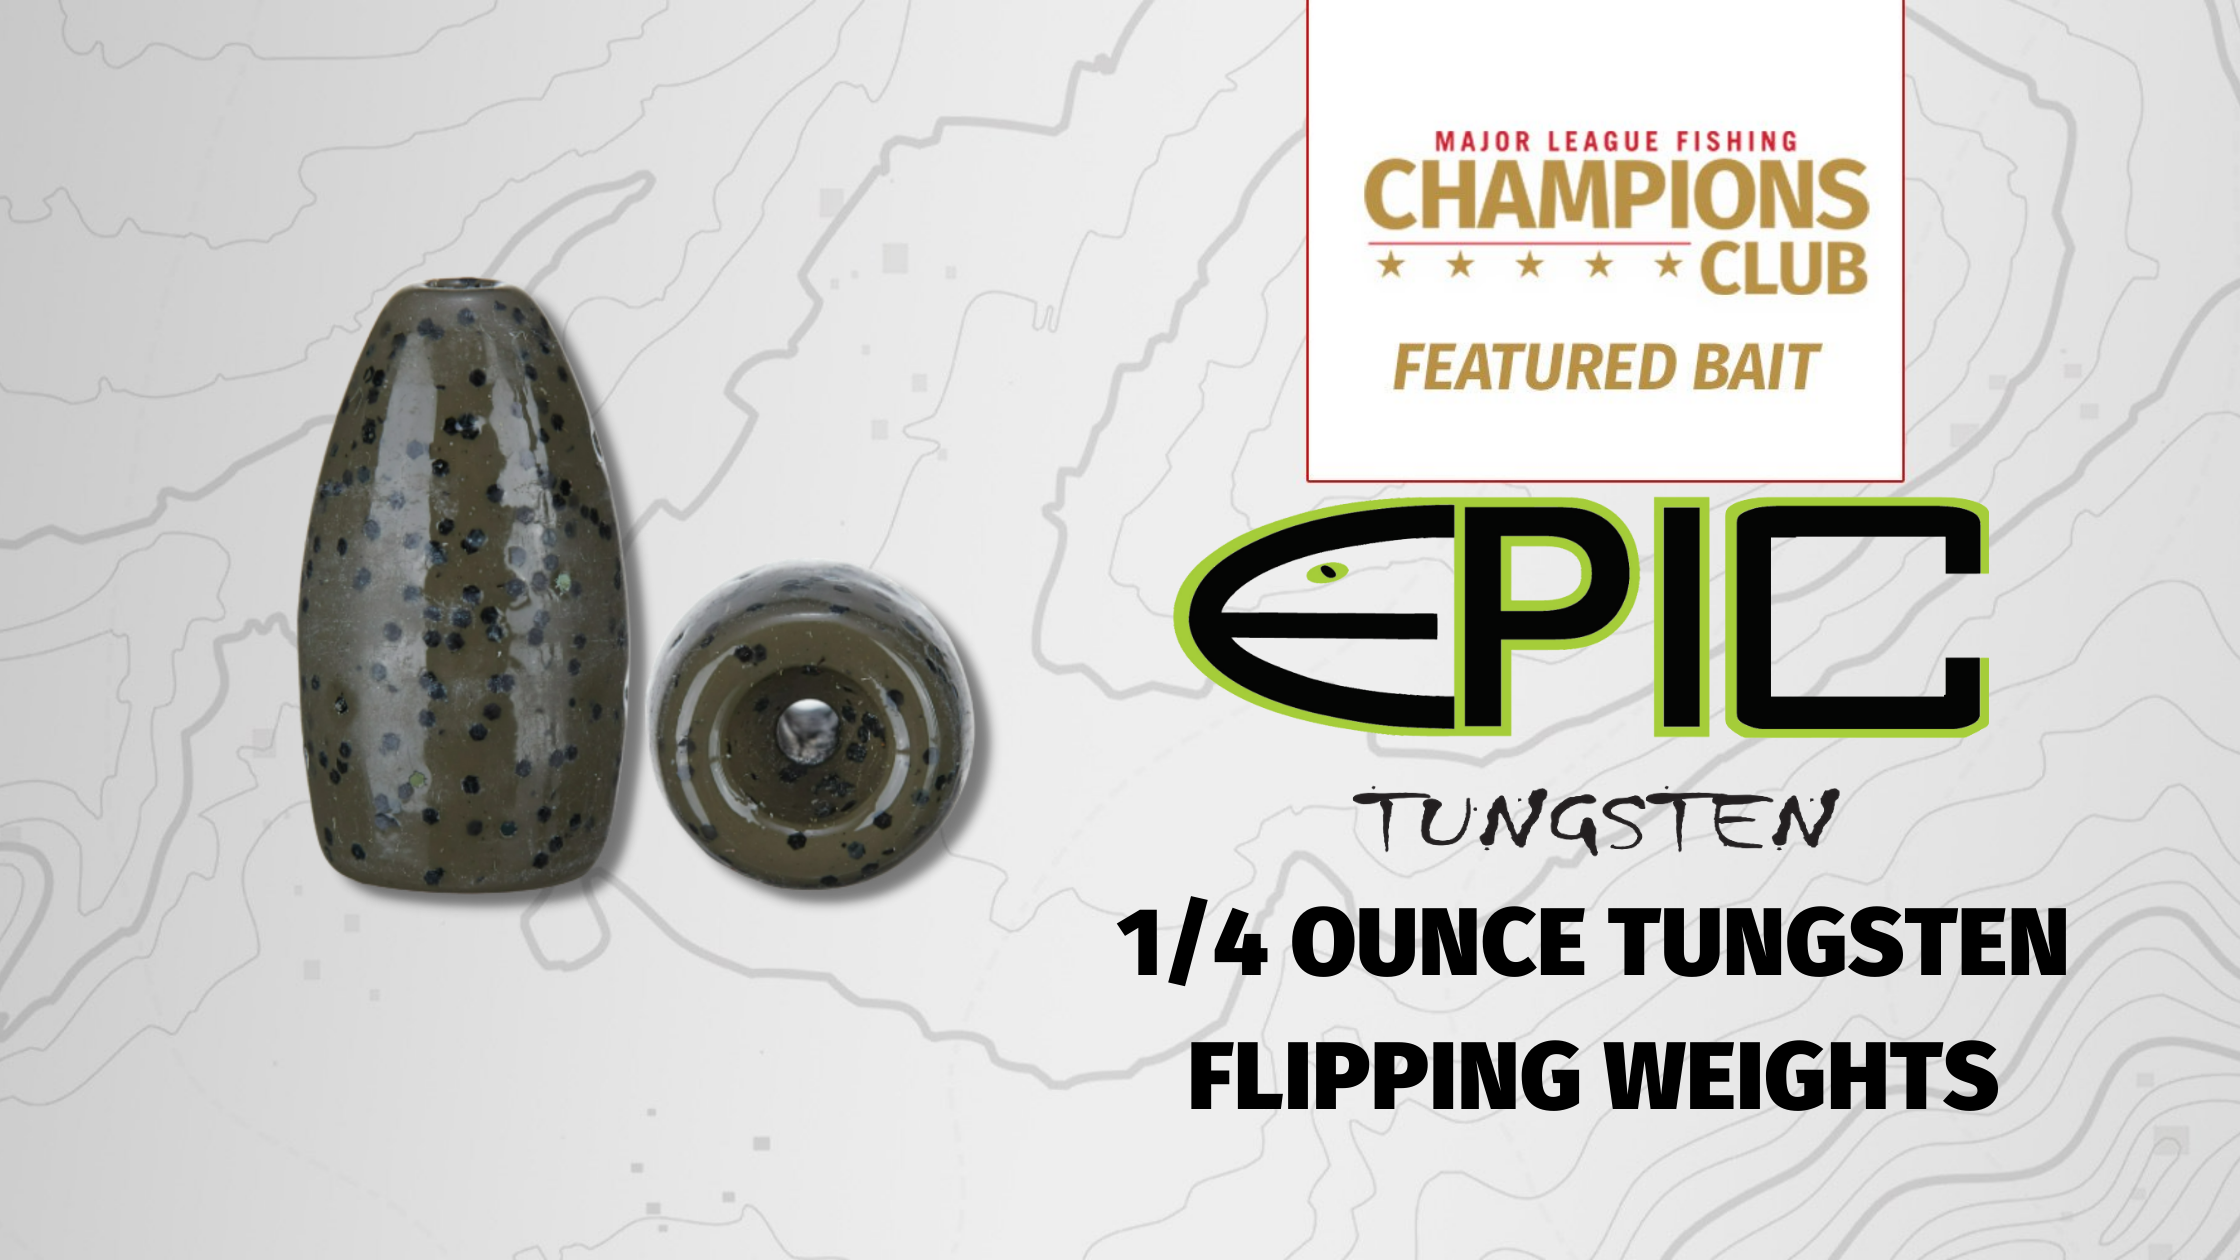 https://majorleaguefishing.com/wp-content/uploads/2022/04/27082941/May-2022-WEB-READY-Epic-Baits-1-4oz-Tungsten-Flipping-Weights.png